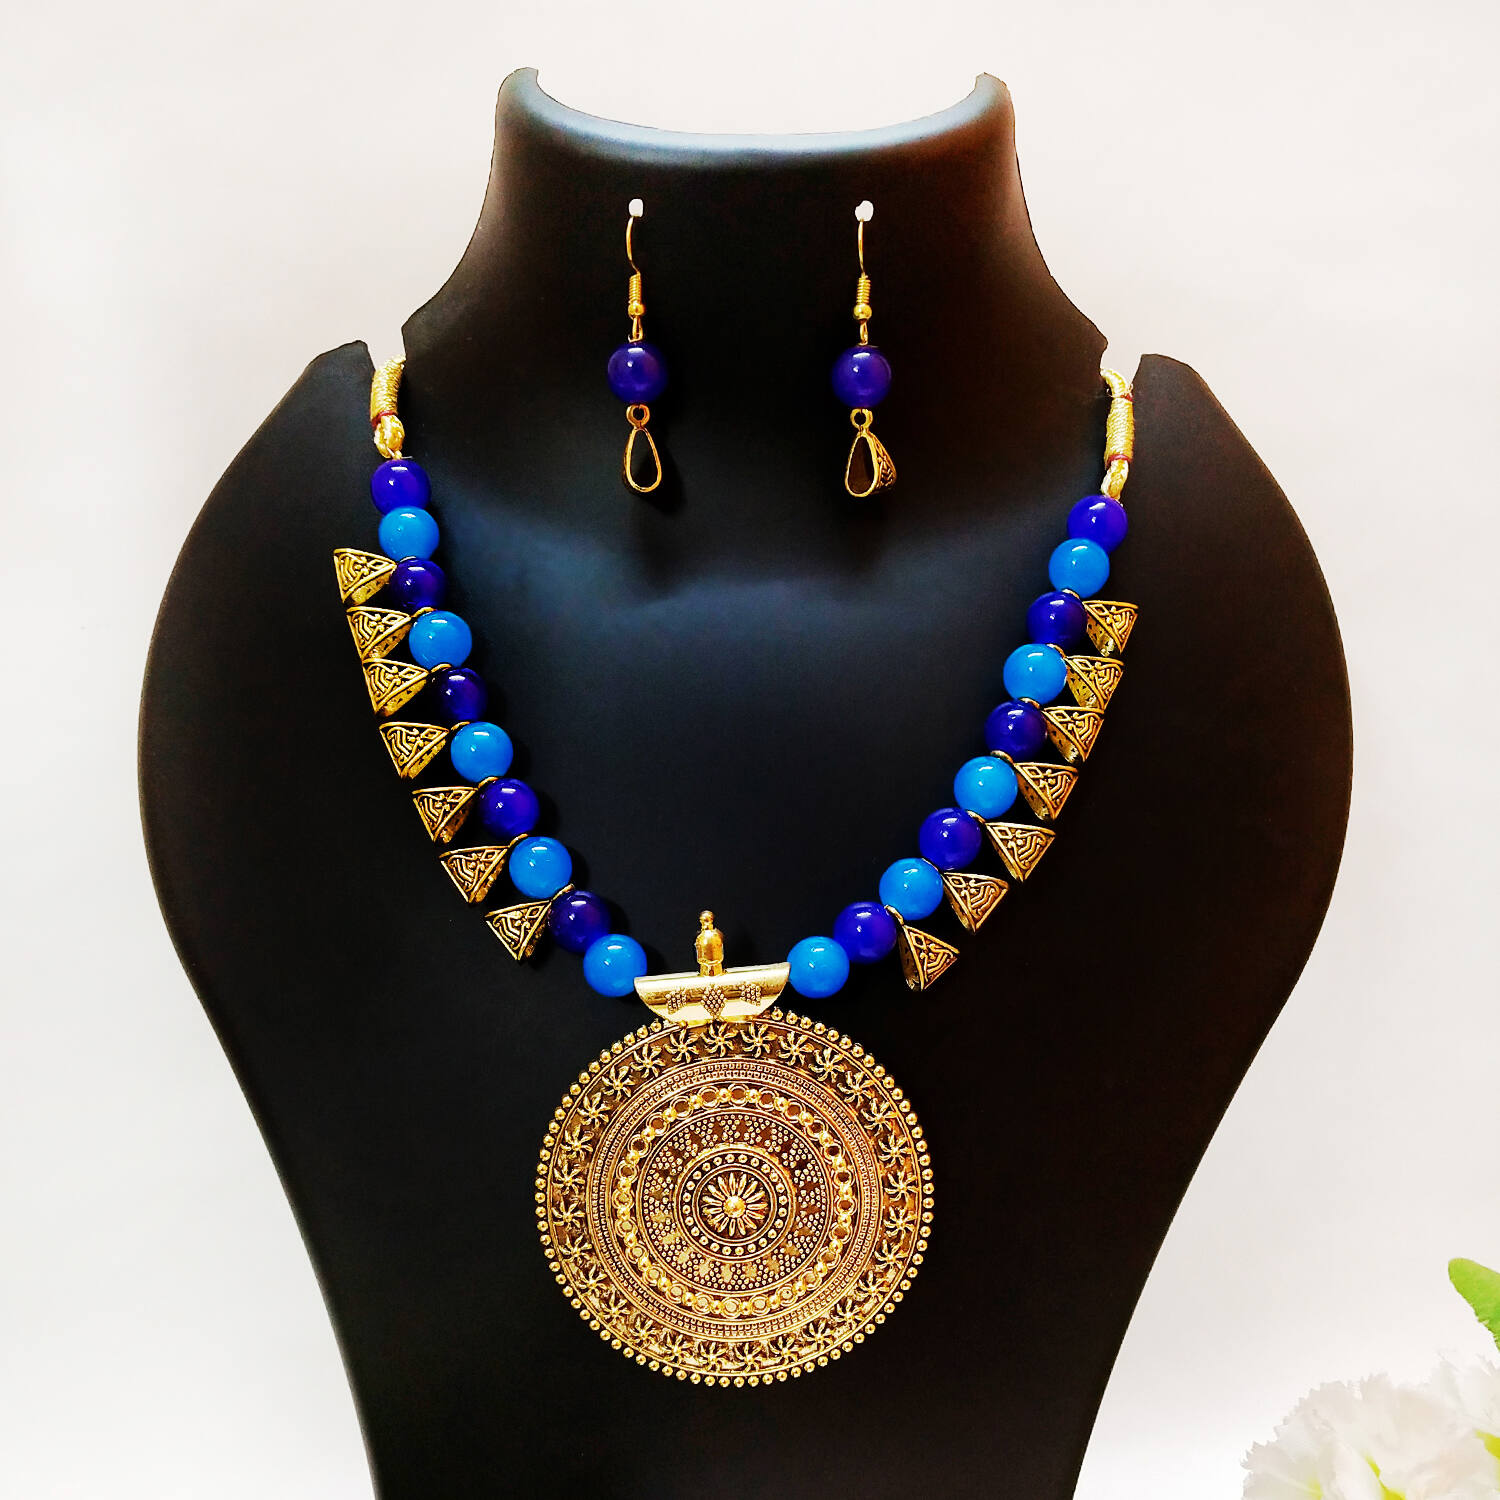 Grand Heiress Blue Opal Tennis Necklace | Local Eclectic – local eclectic